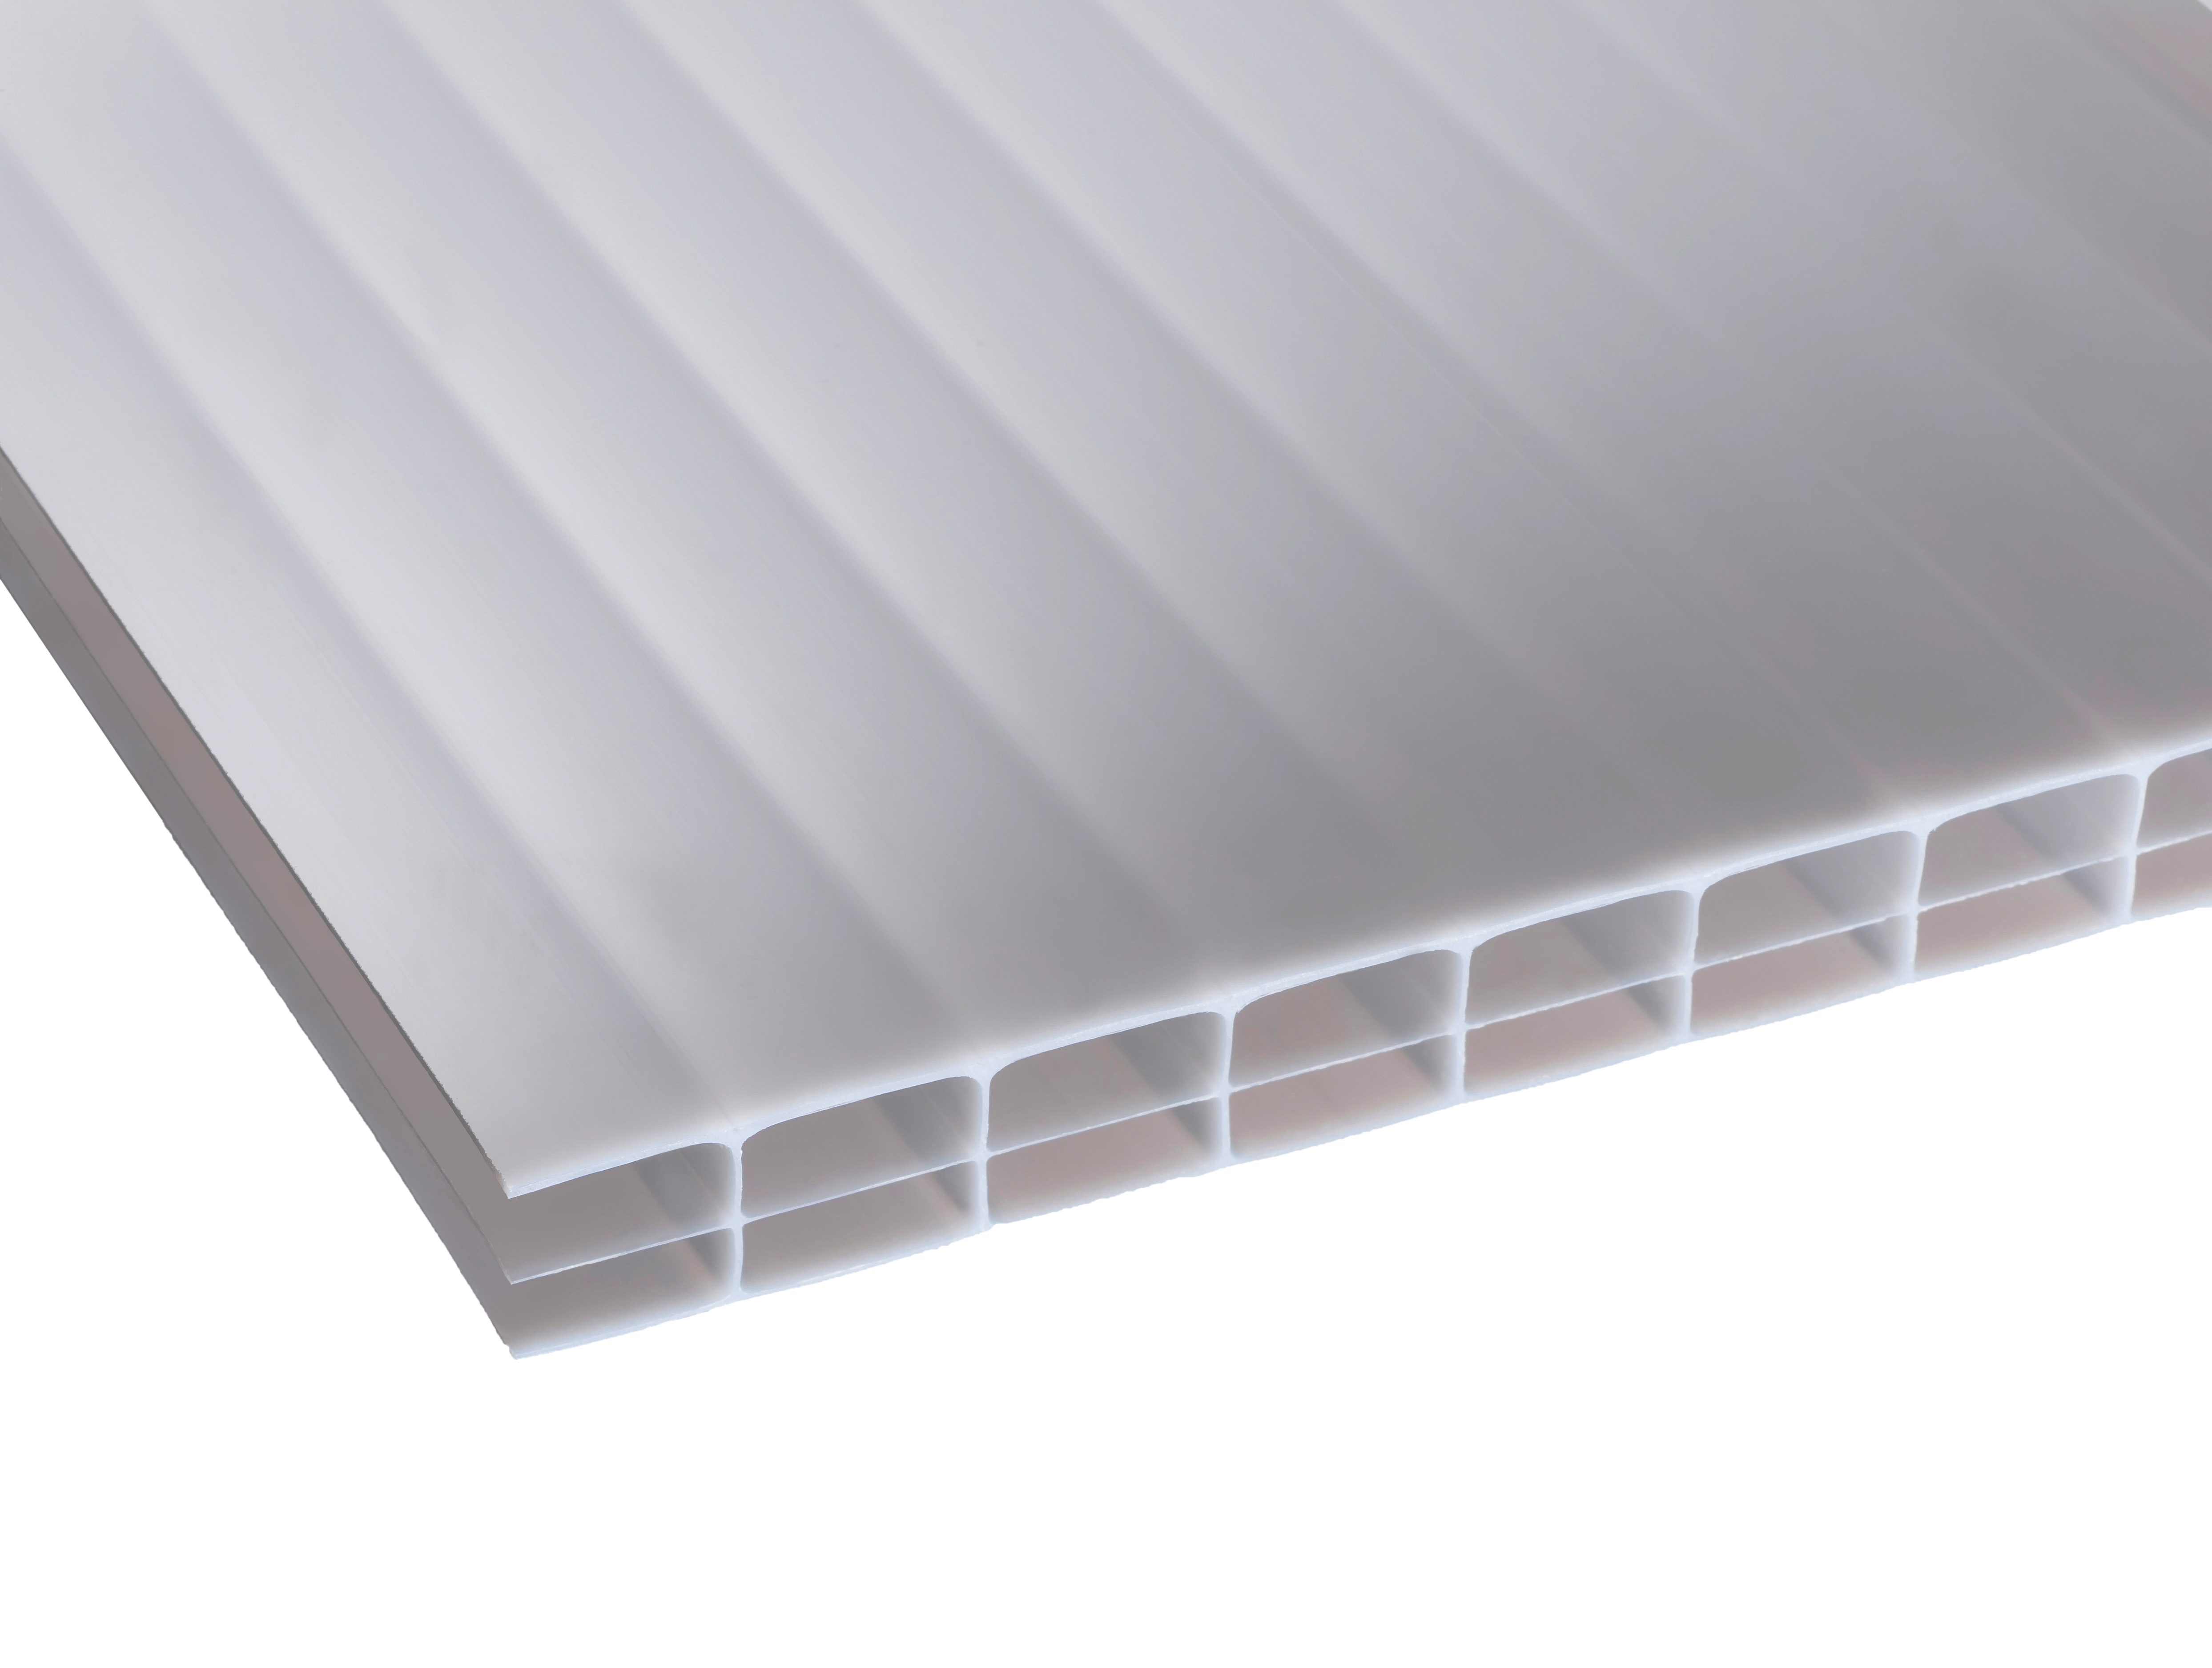 Image of 16mm Opal Multiwall Polycarbonate Sheet - 2500 x 700mm